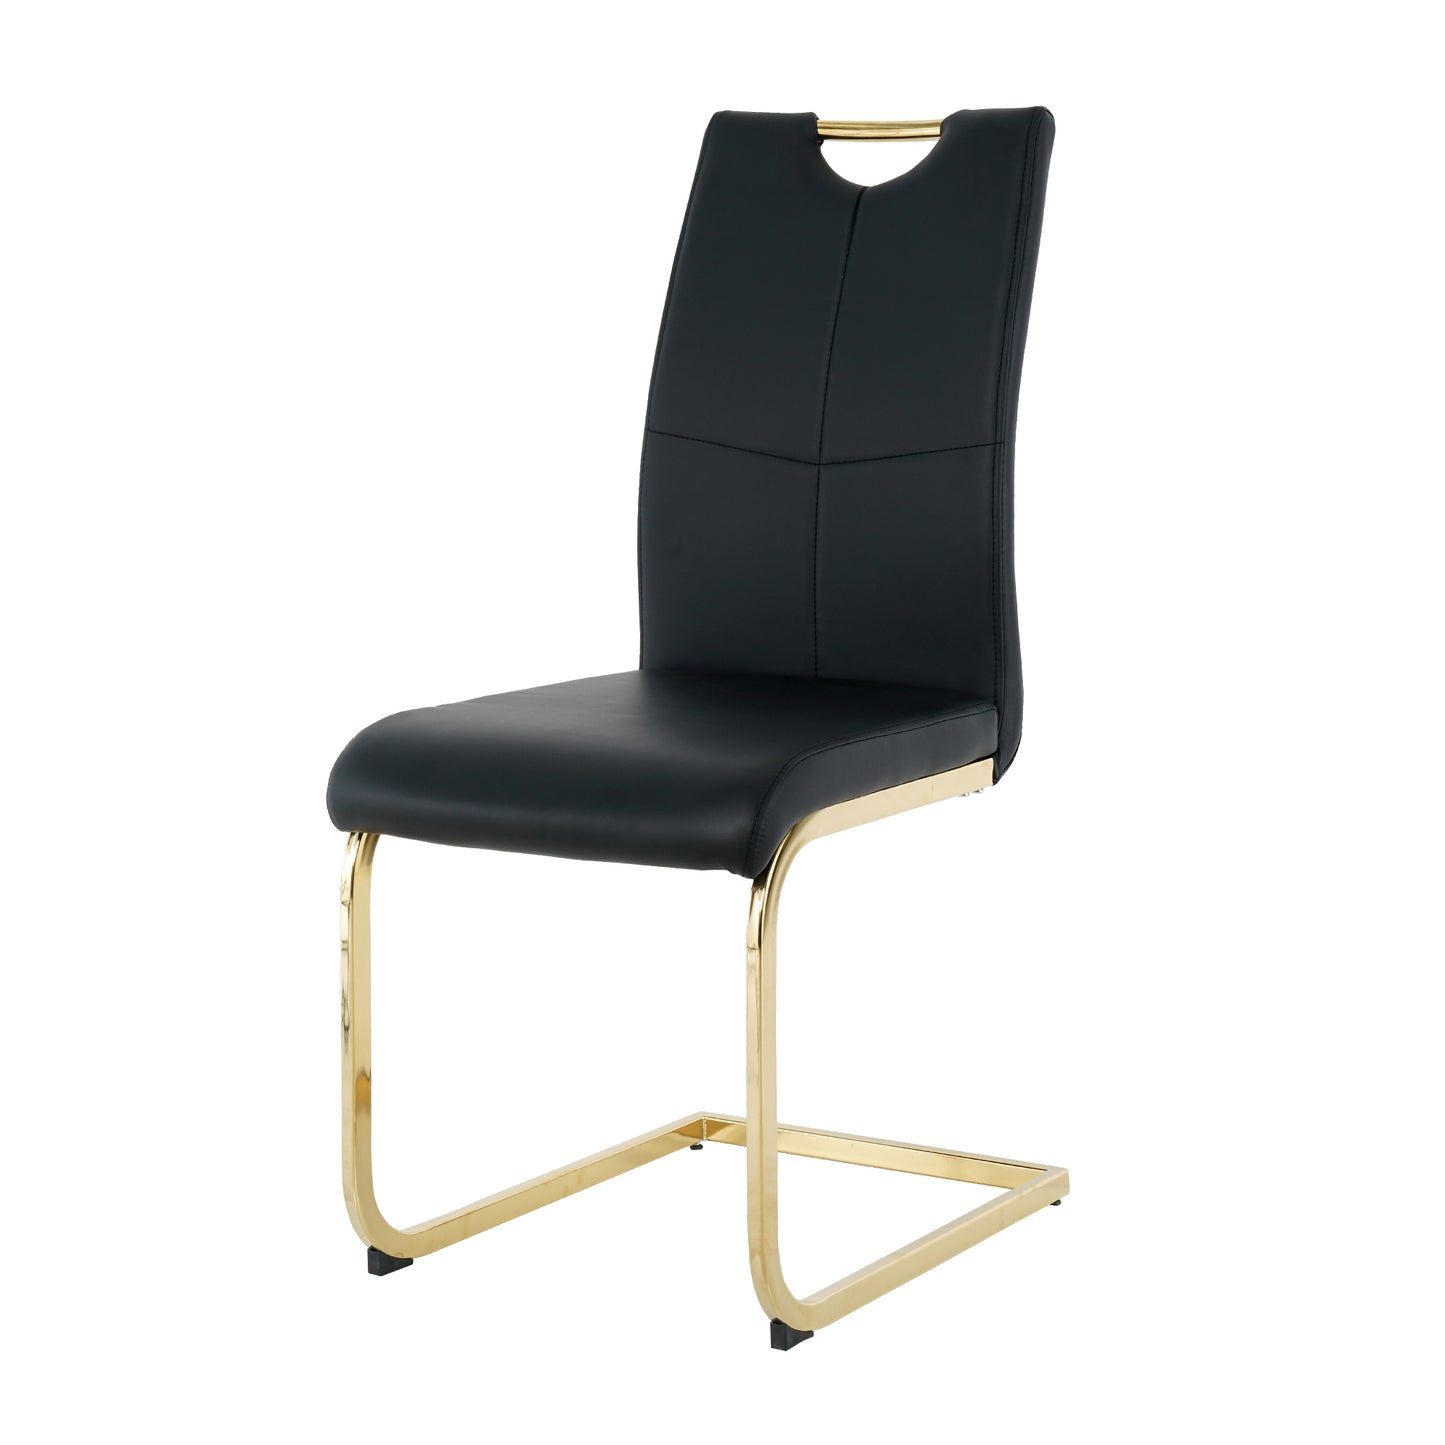 Modern Dining Chairs with Faux Leather Padded Seat Dining Living Room Chairs Upholstered Chair with gold Metal Legs Design for Kitchen, Living, Bedroom, Dining Room Side Chairs Set of 2 - Enova Luxe Home Store